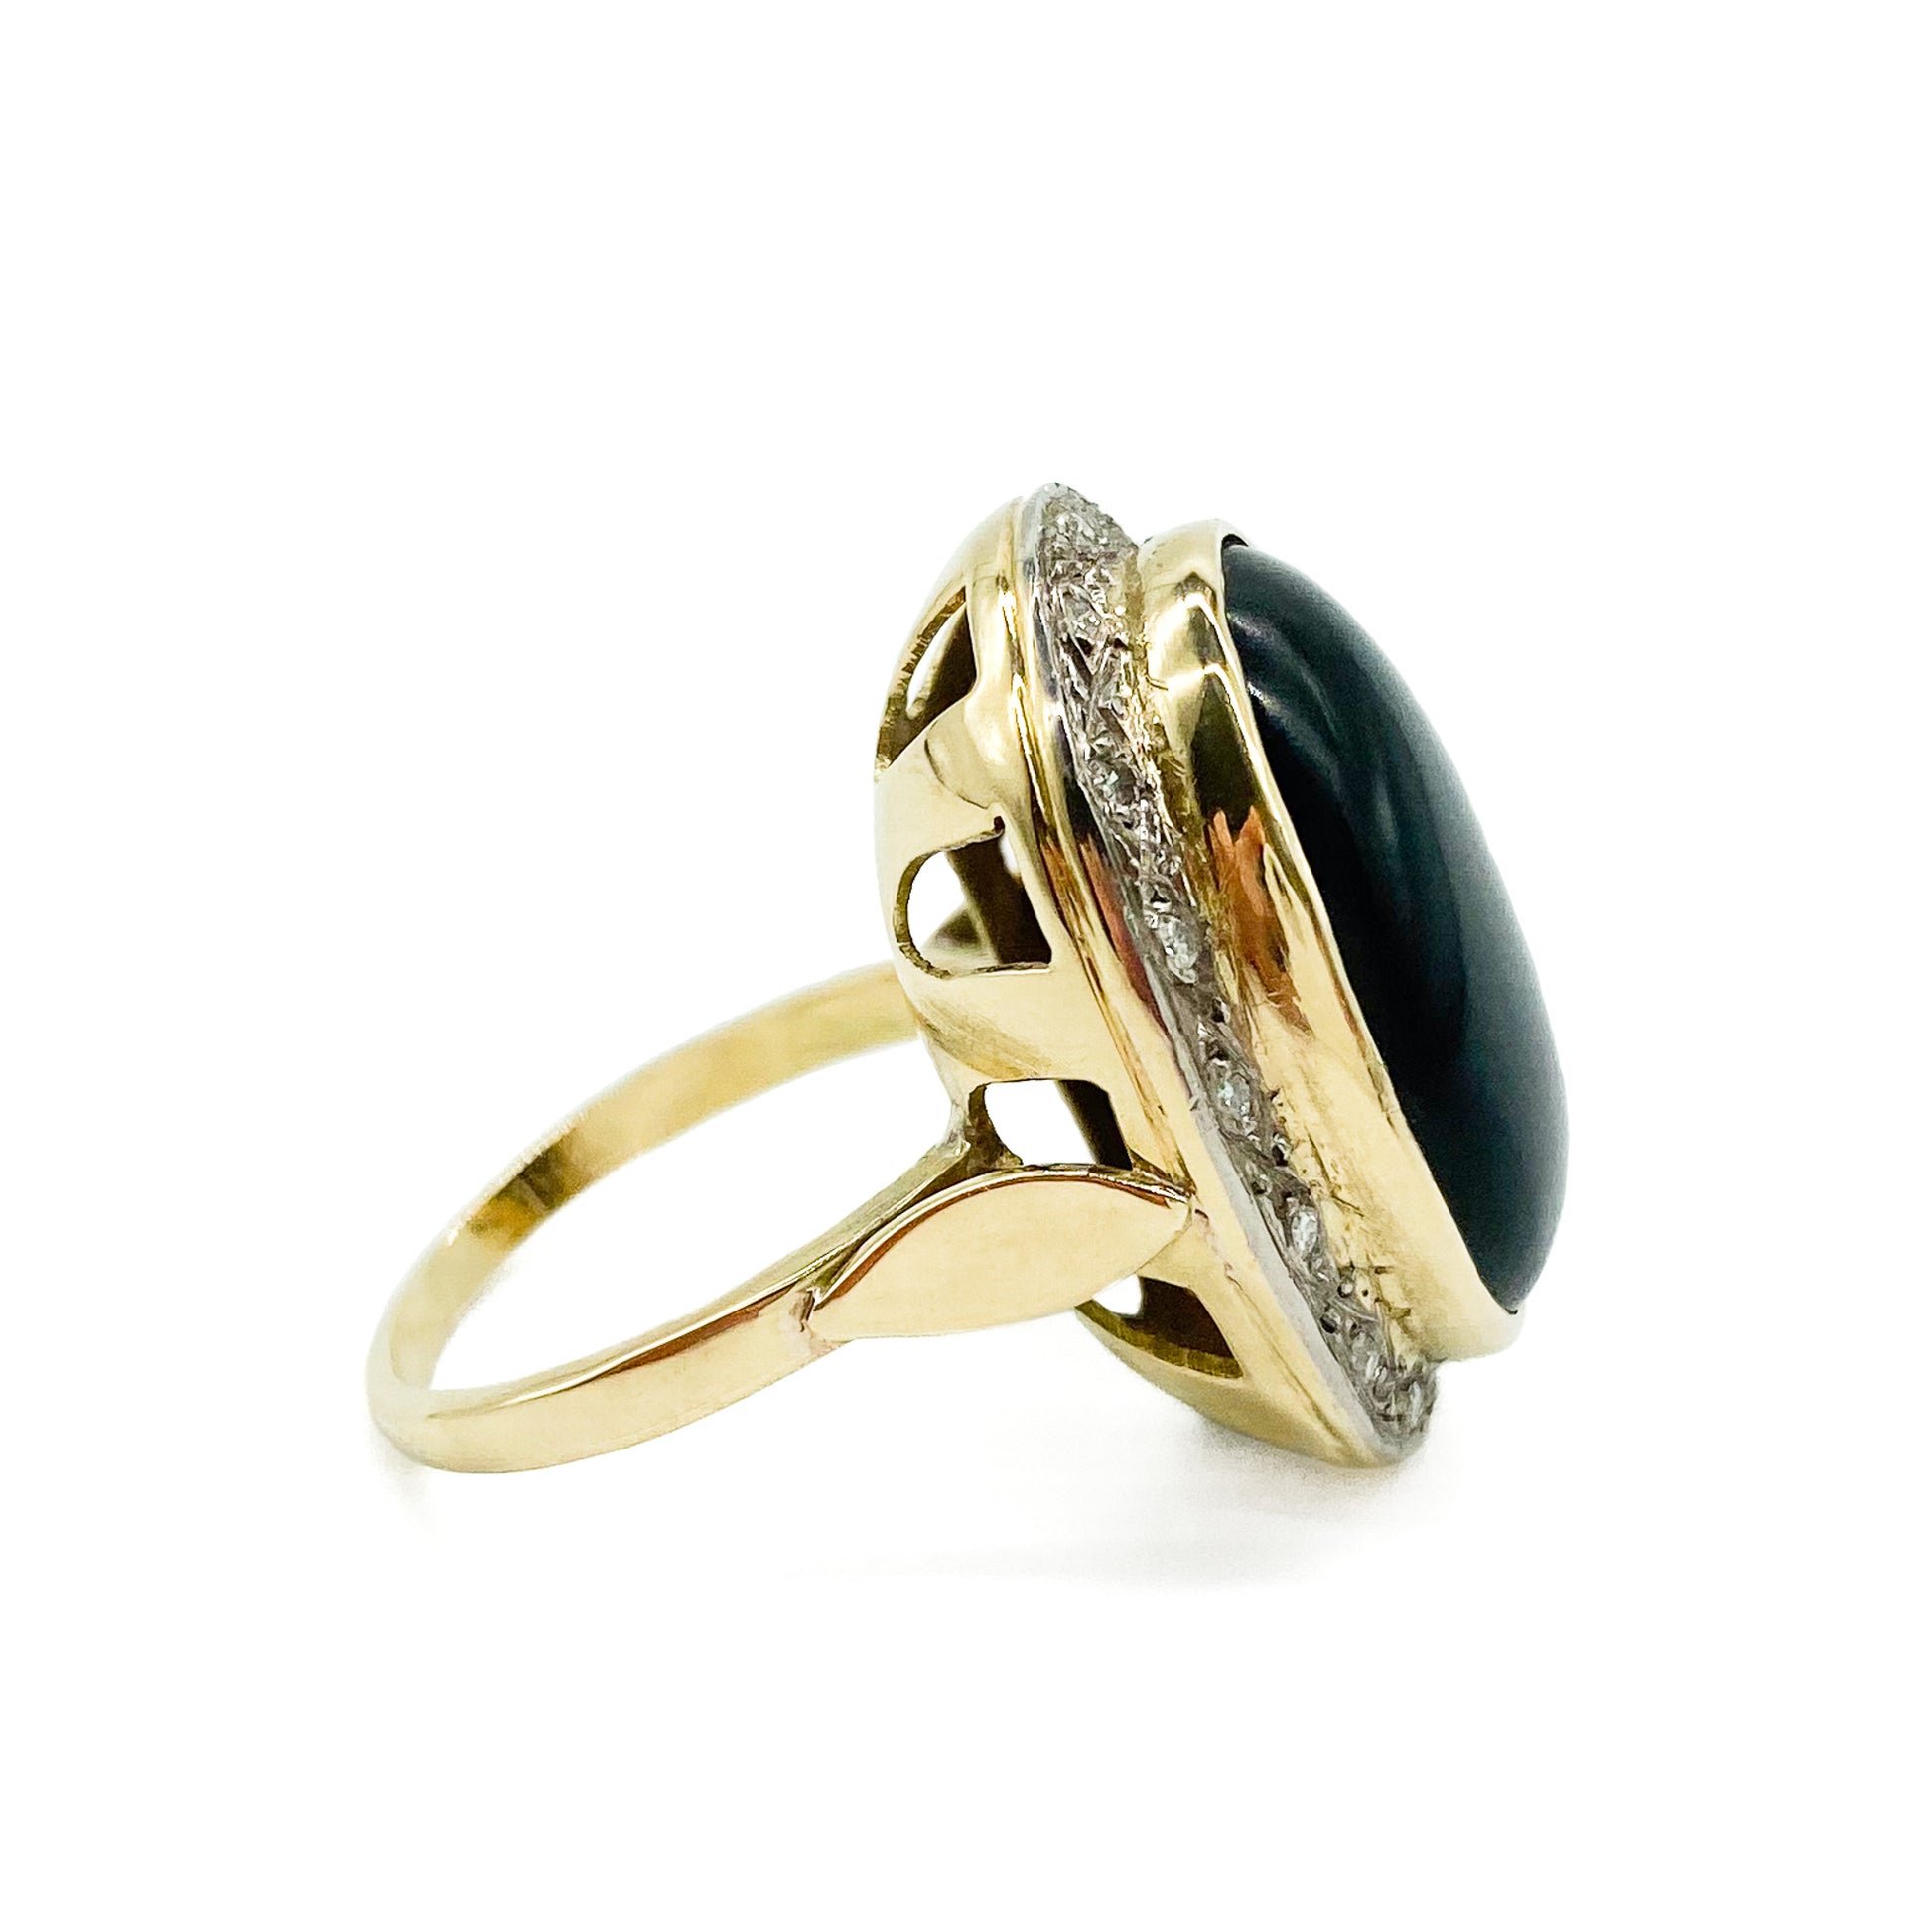 Magnificent vintage 18ct gold ring set with sixteen small diamonds and an oval cabochon onyx stone. Argentina